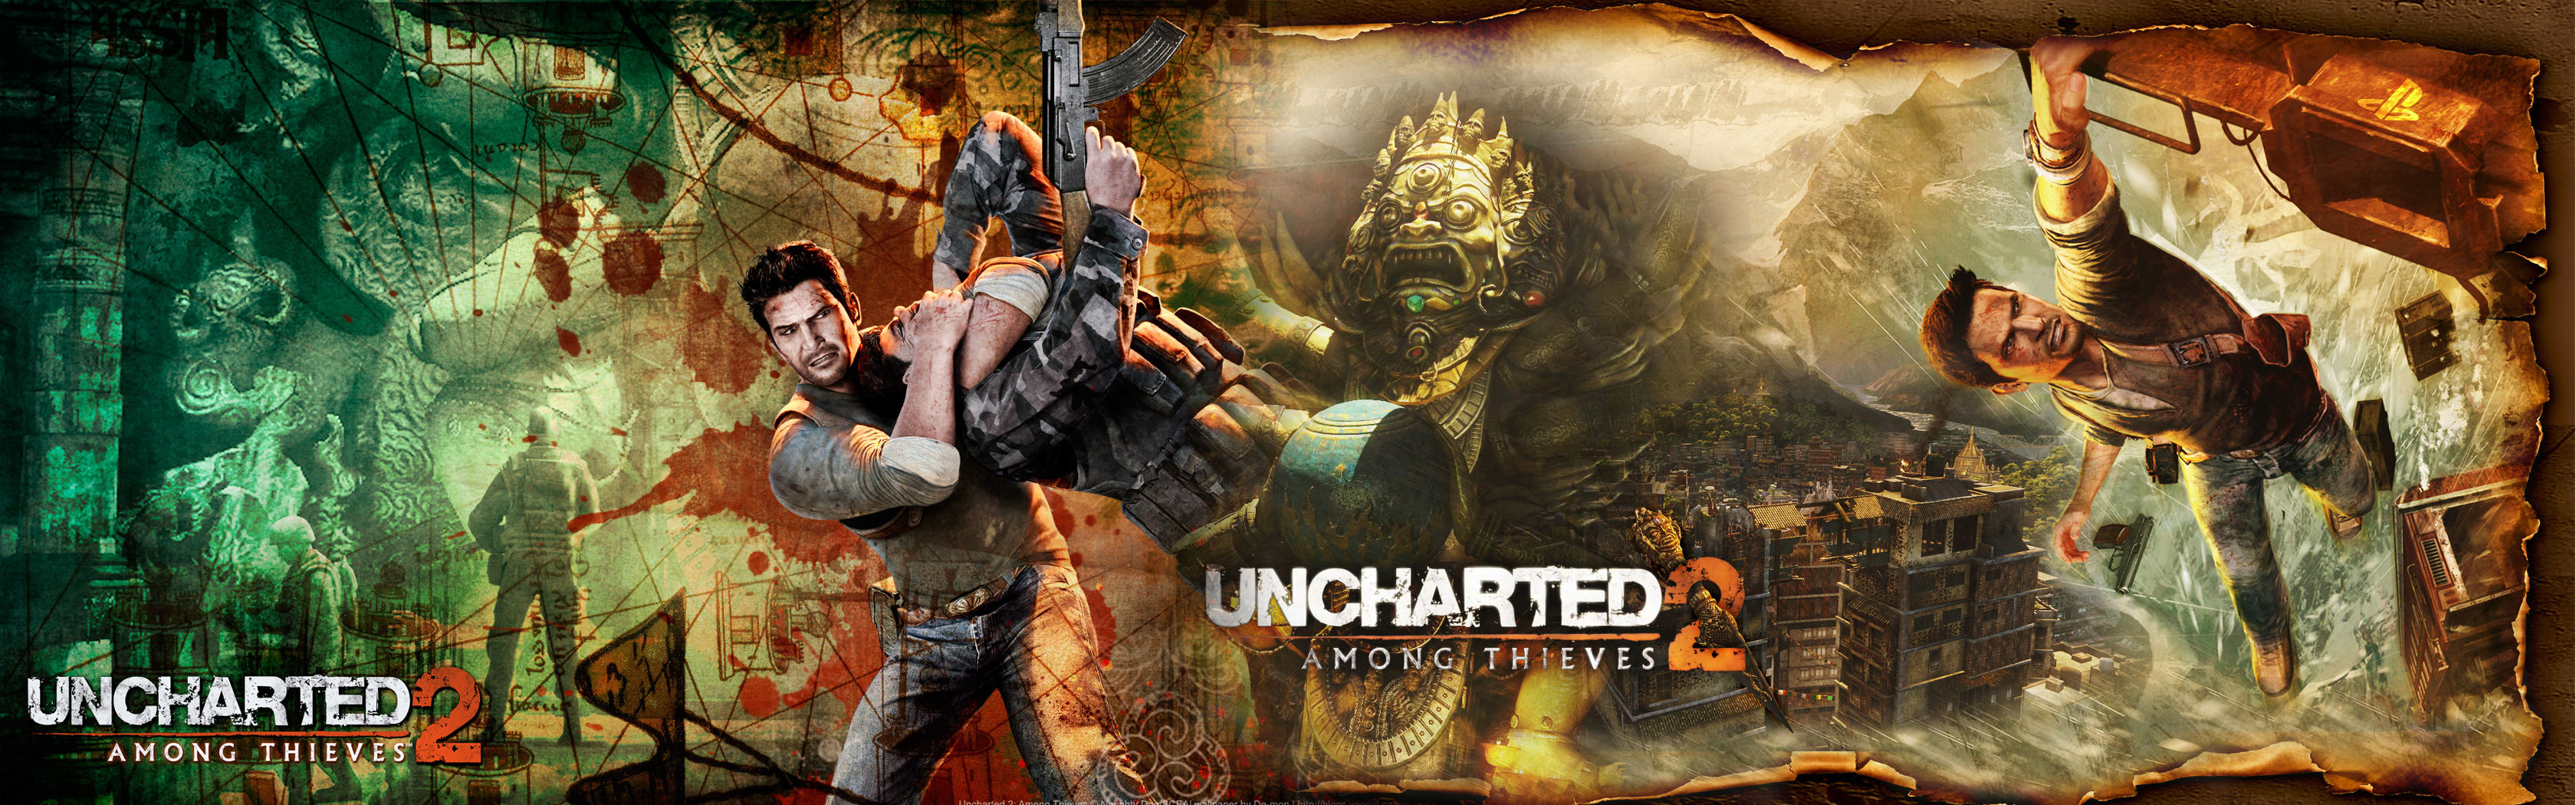 Video Game Uncharted 2 Among Thieves 3360x1050